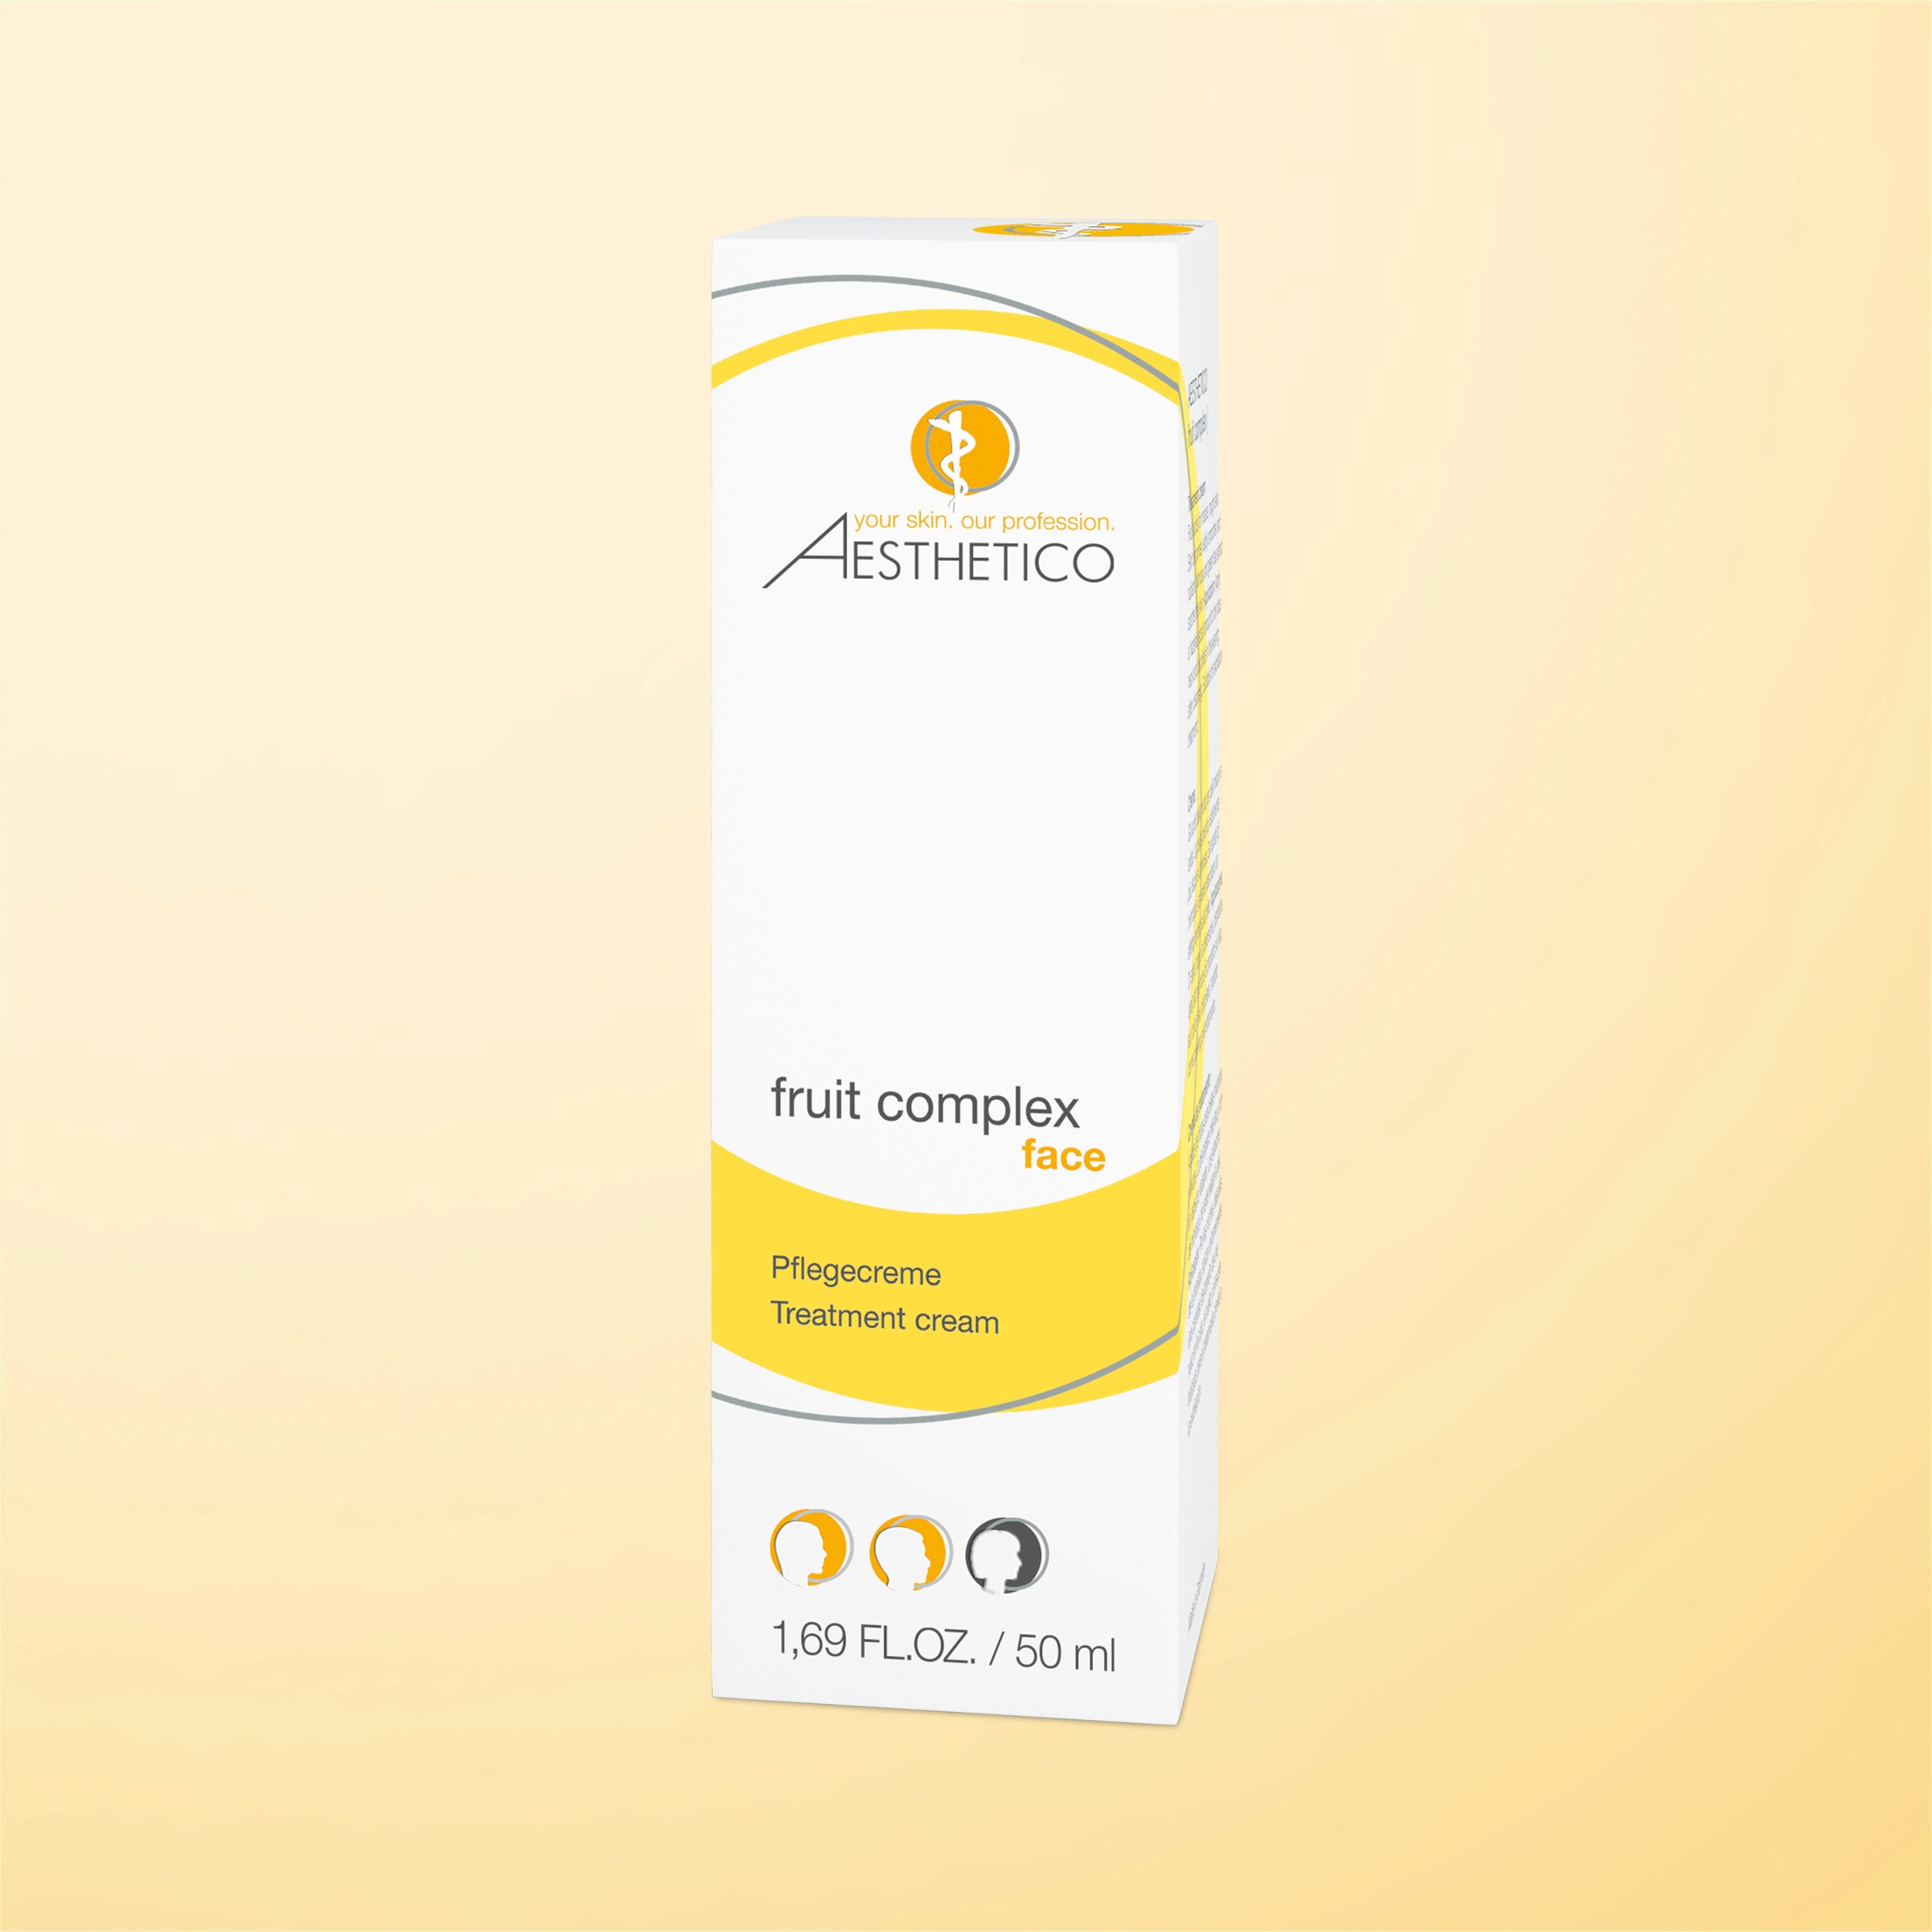 Umverpackung AESTHETICO fruit complex, 50 ml